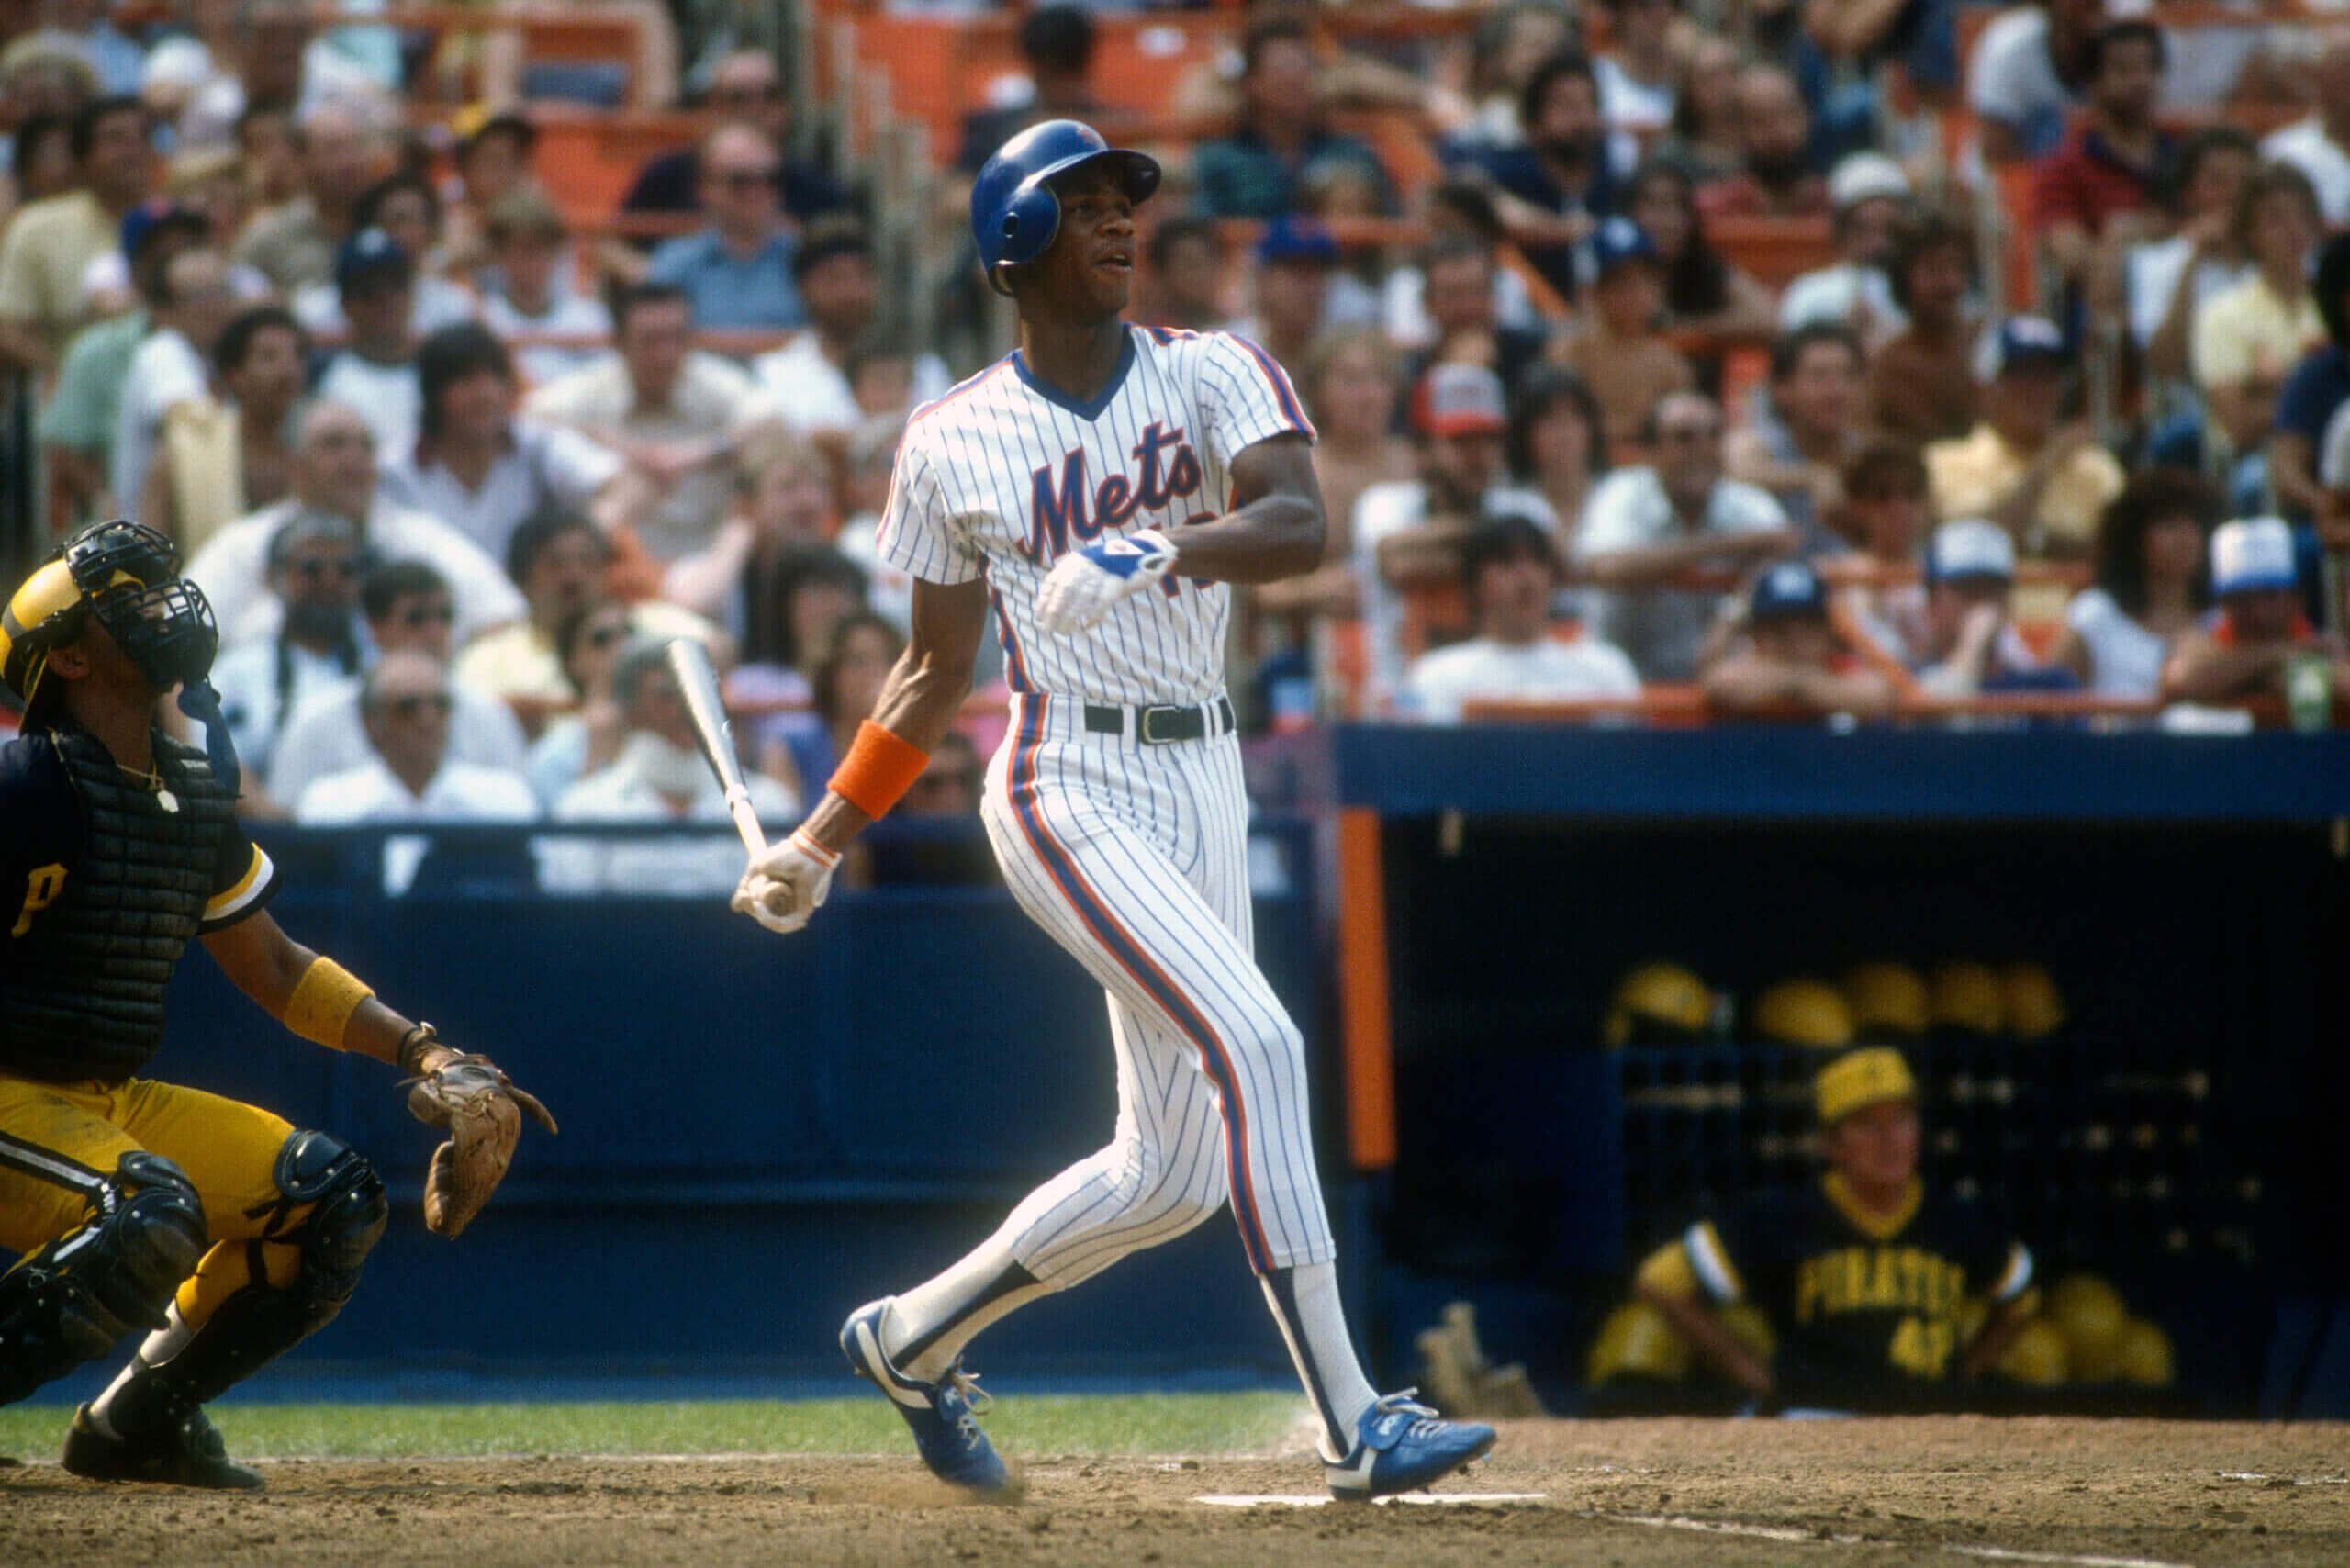 Darryl Strawberry wanted to quit baseball at 19. These two Mets brought him back